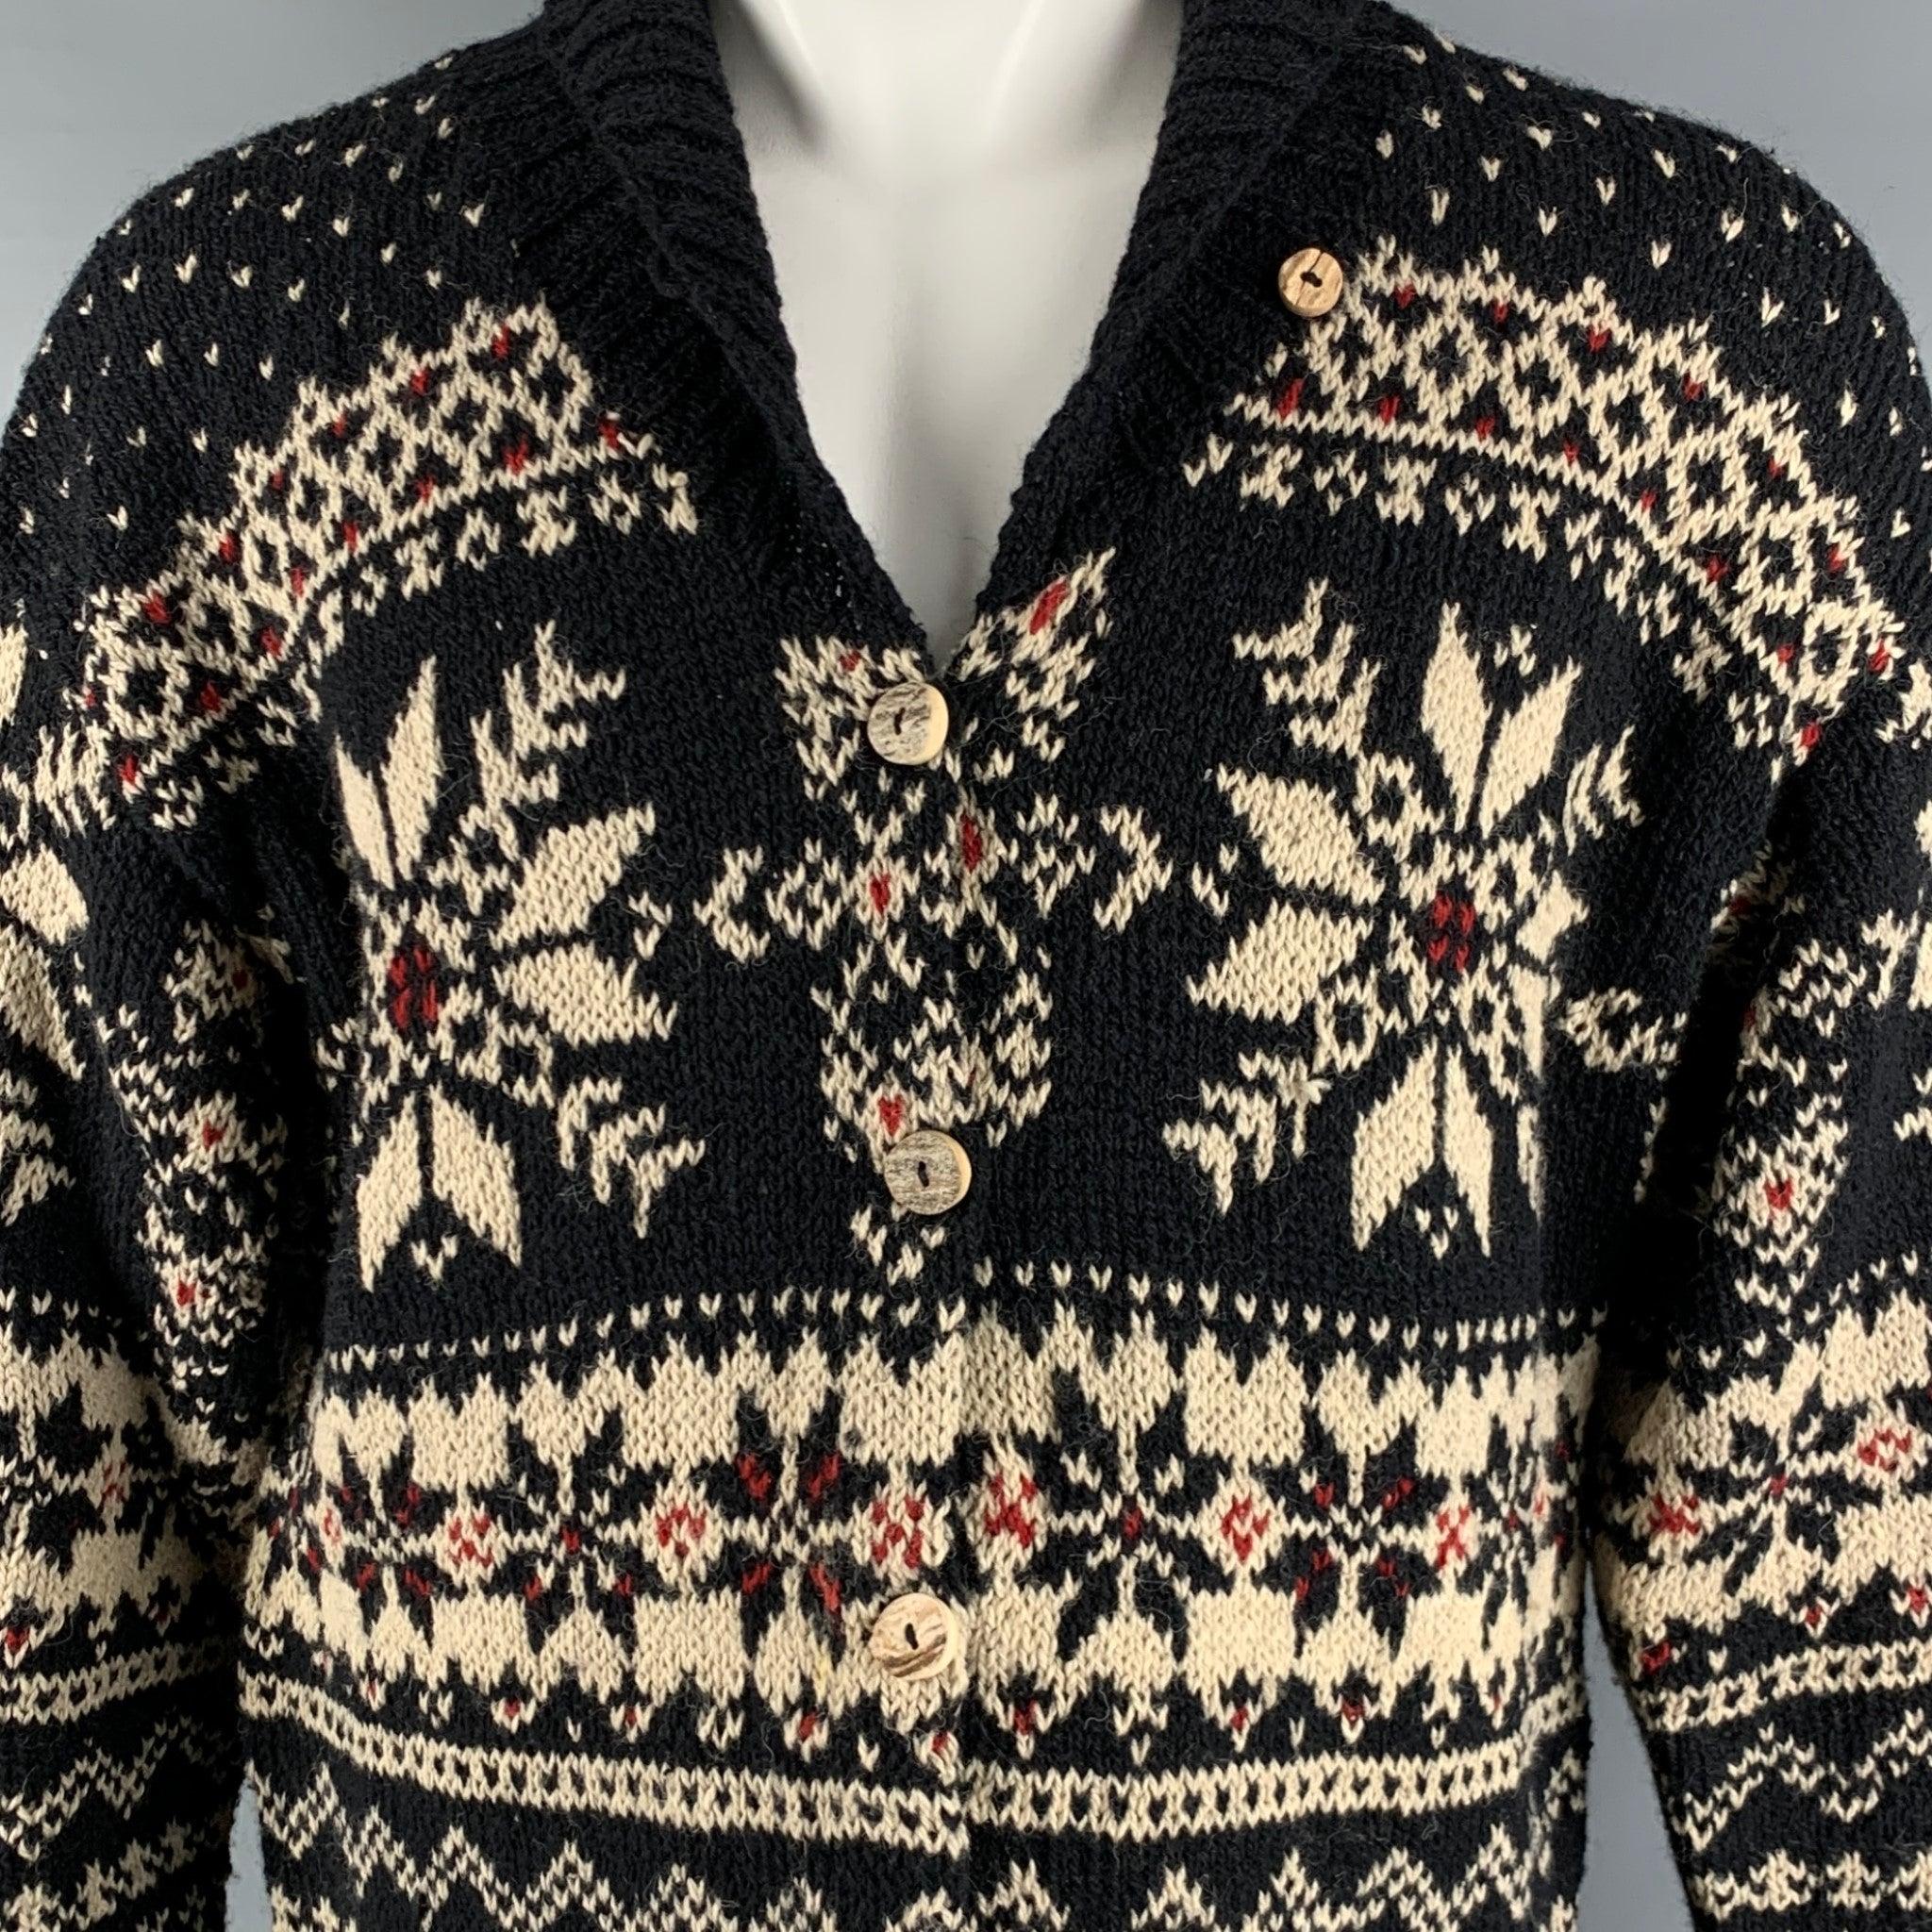 RALPH LAUREN cardigan in a black wool silk blend fabric featuring a white and red Nordic-style snowflake pattern, oversized fit, shawl collar, and button closure.Very Good Pre-Owned Condition. Minor signs of wear. 

Marked:   L 

Measurements: 
